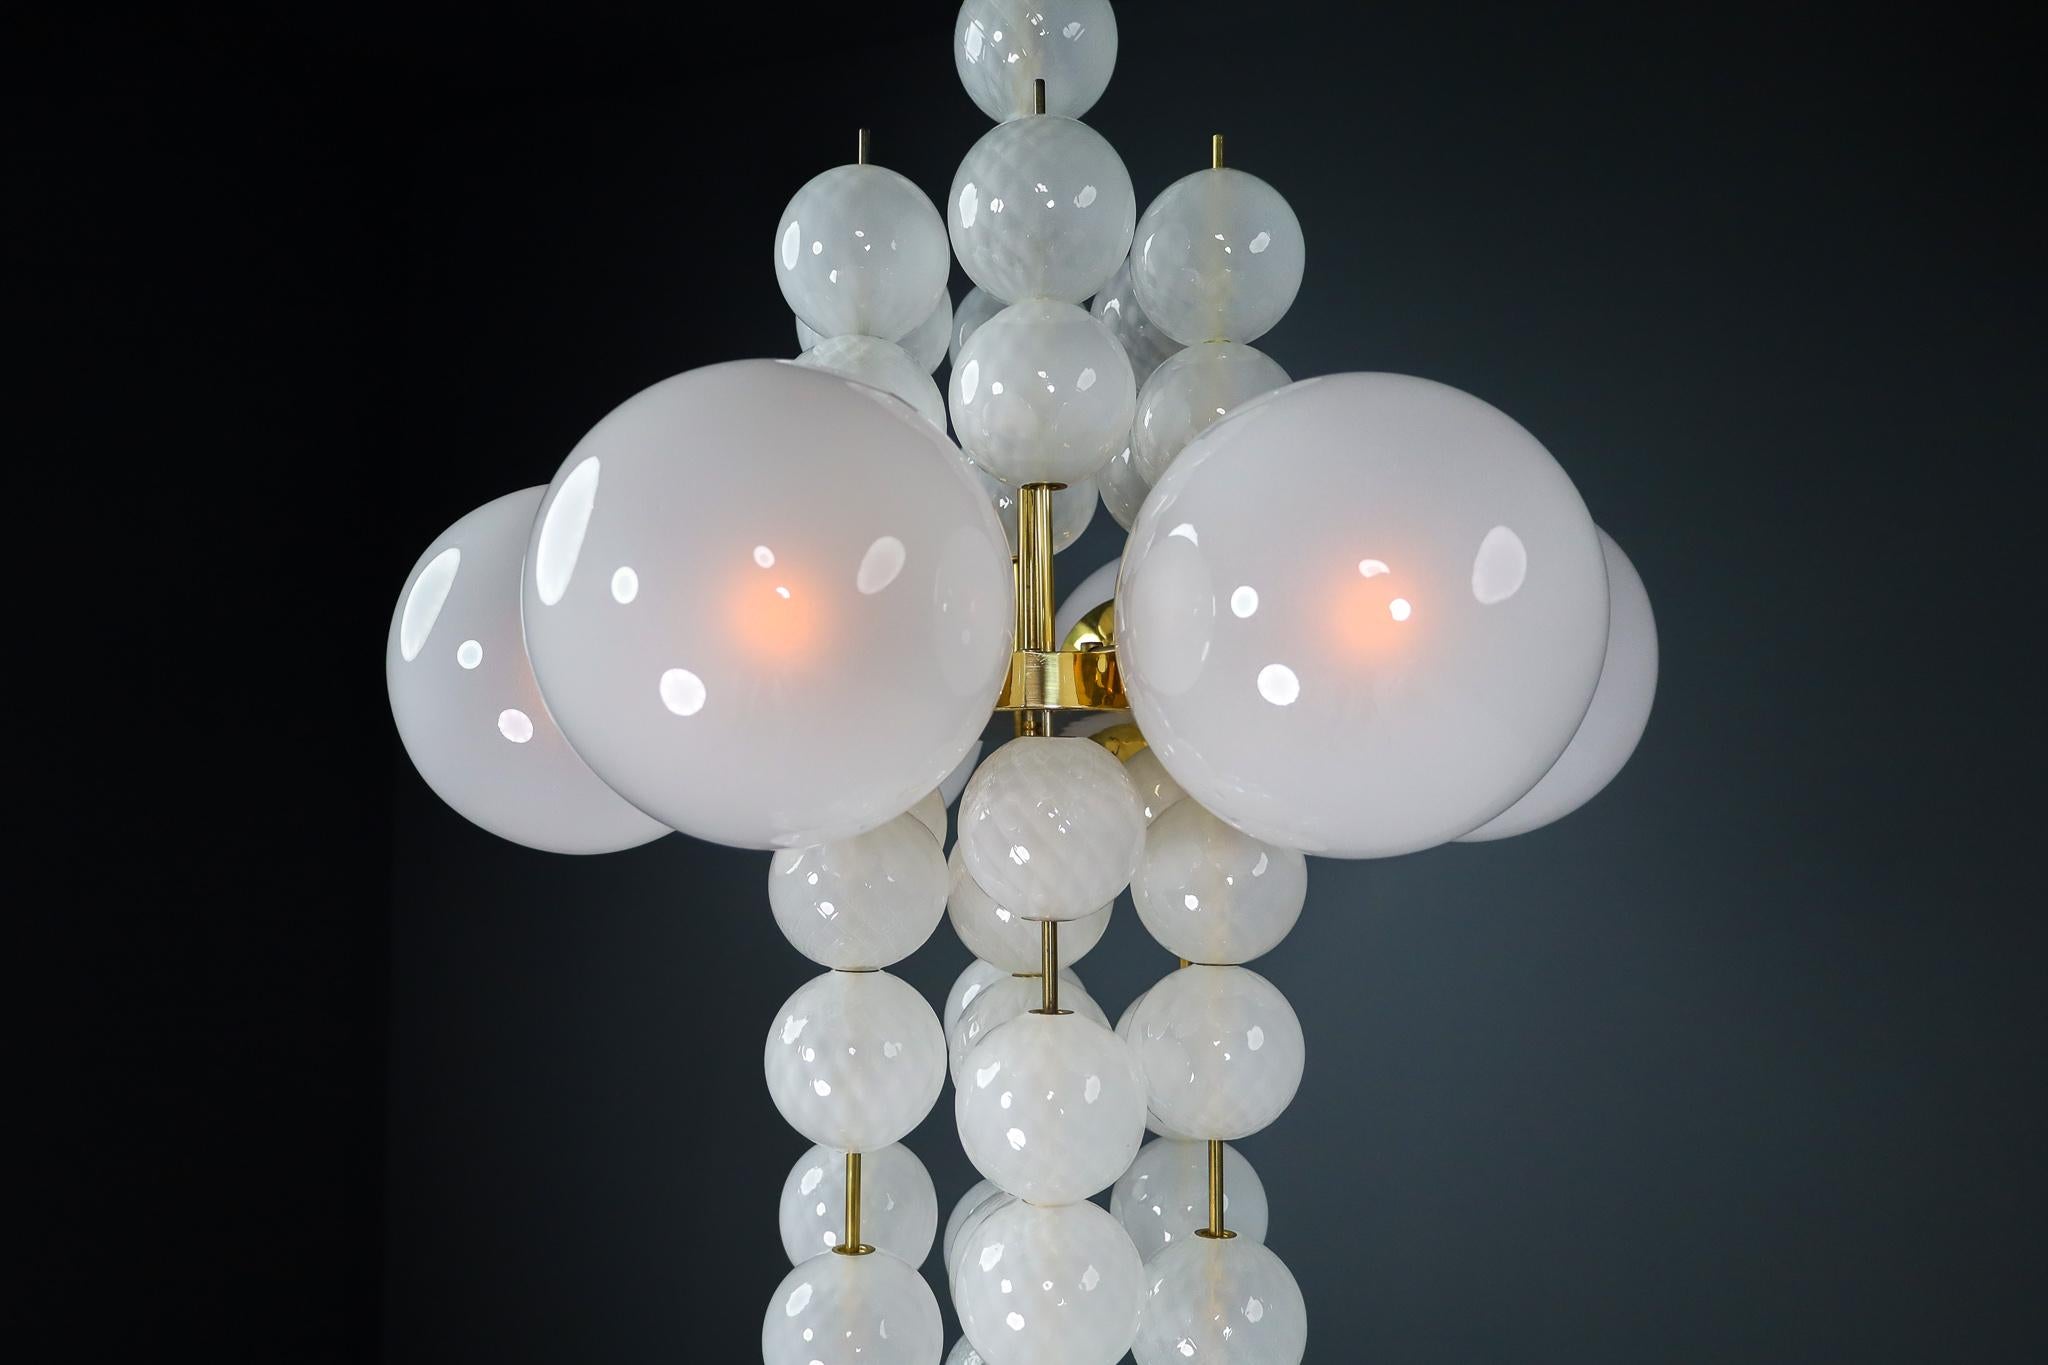 Set of 3 XL Hotel Chandeliers with Brass Fixture and Hand-Blowed Glass Globes 4